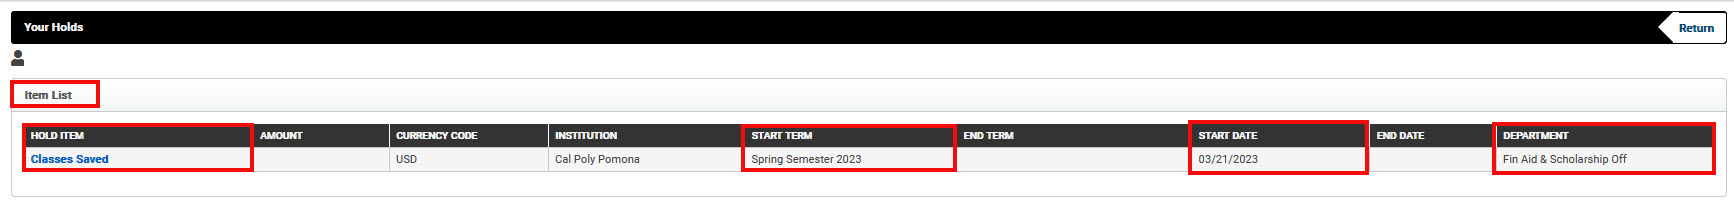 image of holds screen with Hold Item, Start Term, Start Date, and Department highlighted